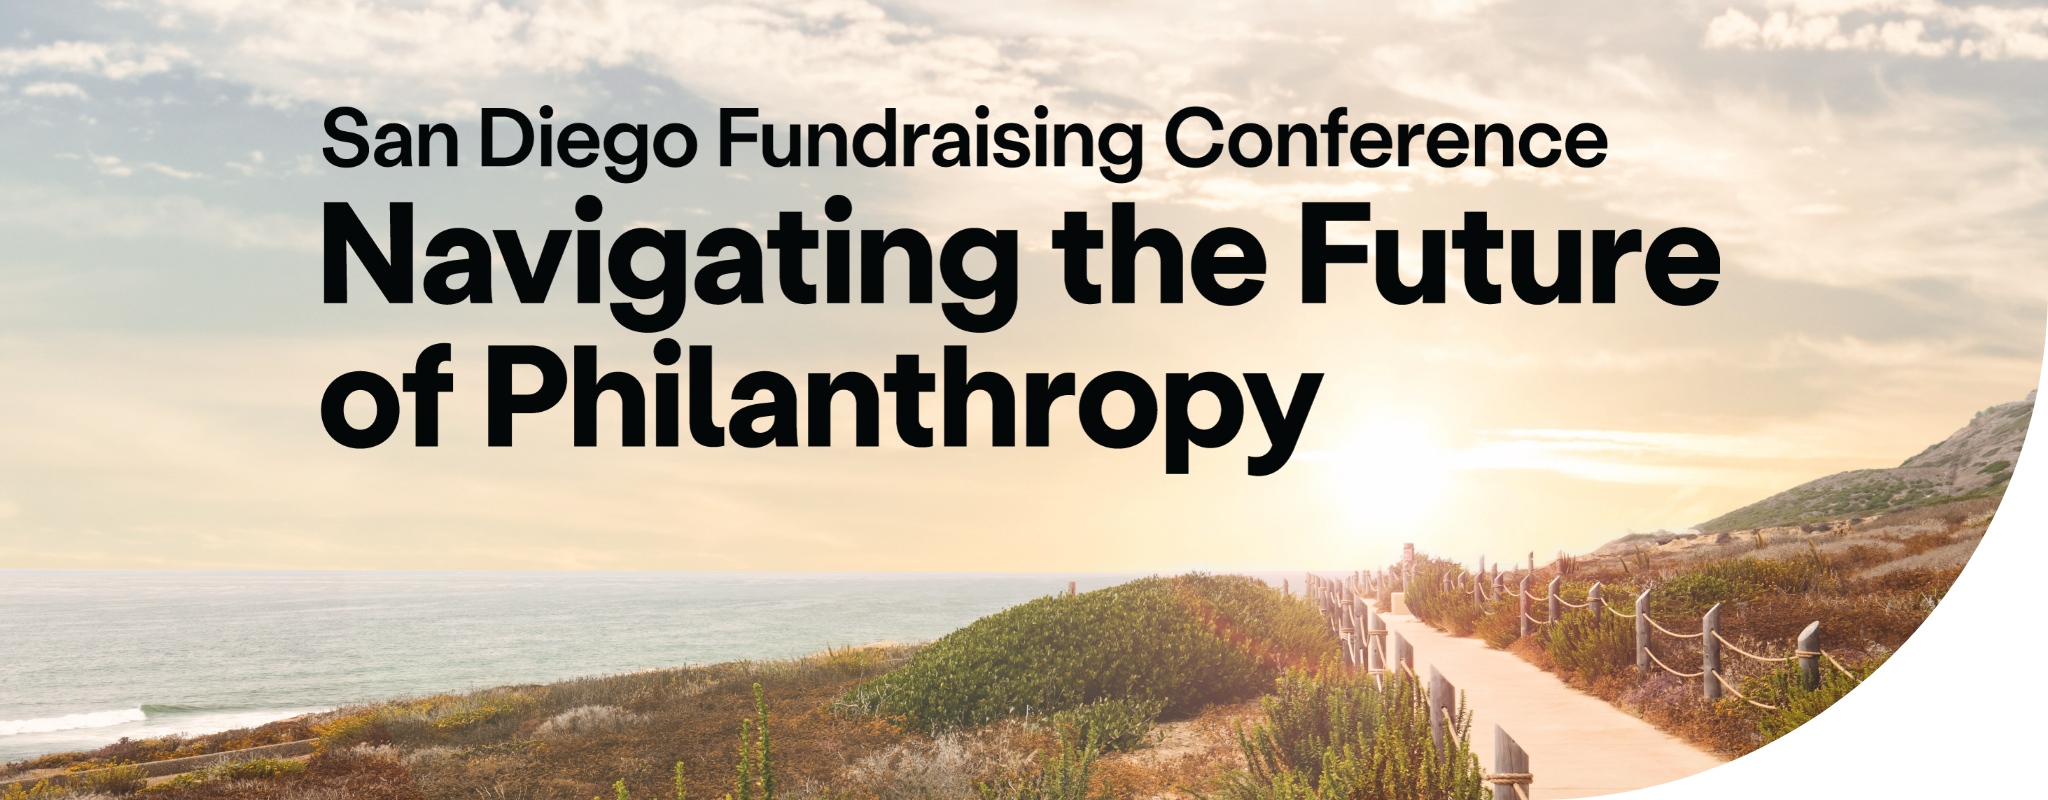 San Diego Fundraising Conference: Navigating the Future of Philanthropy